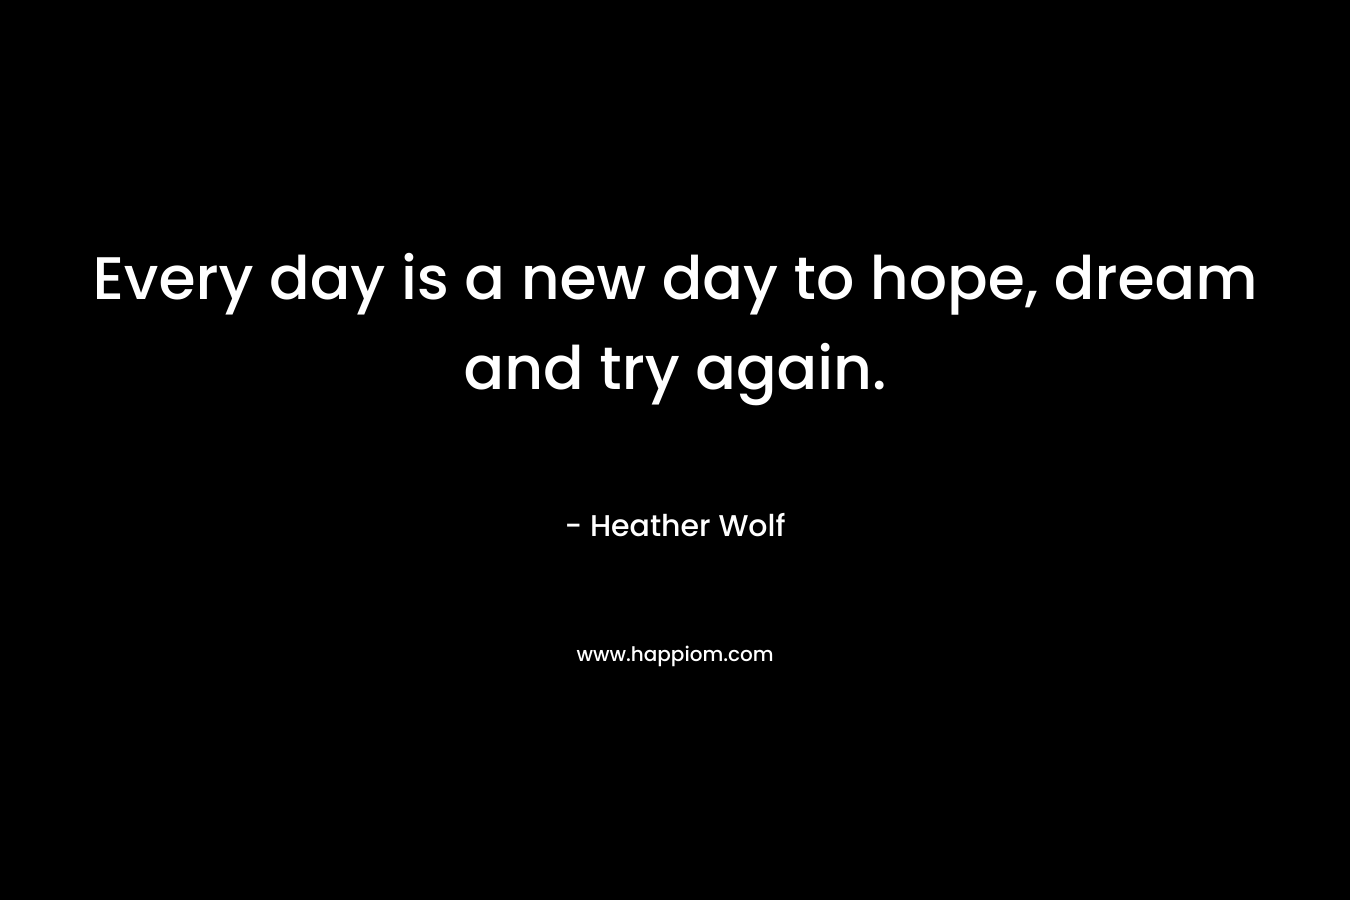 Every day is a new day to hope, dream and try again. – Heather Wolf